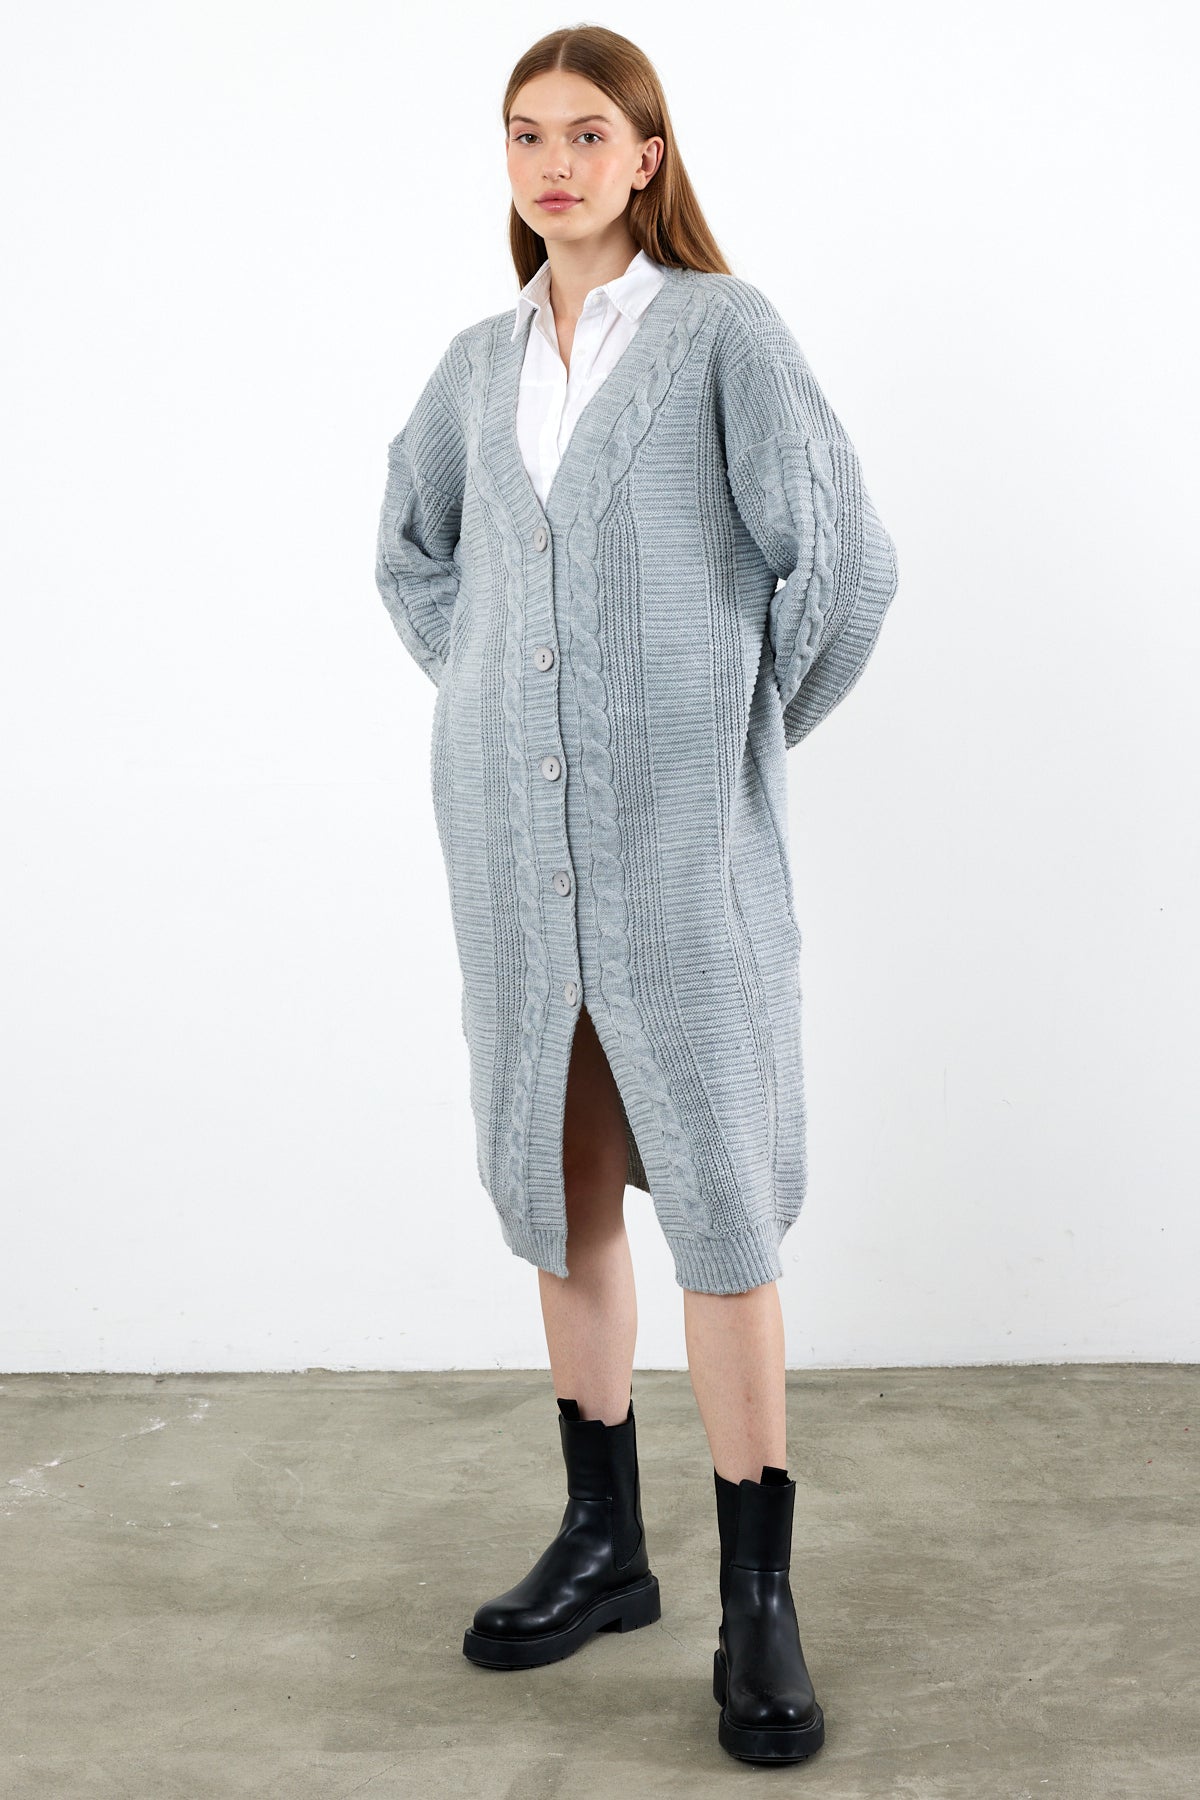 Long Length Knit Cardigan Knit Detailed Duster Solid Color - SKU: 3670